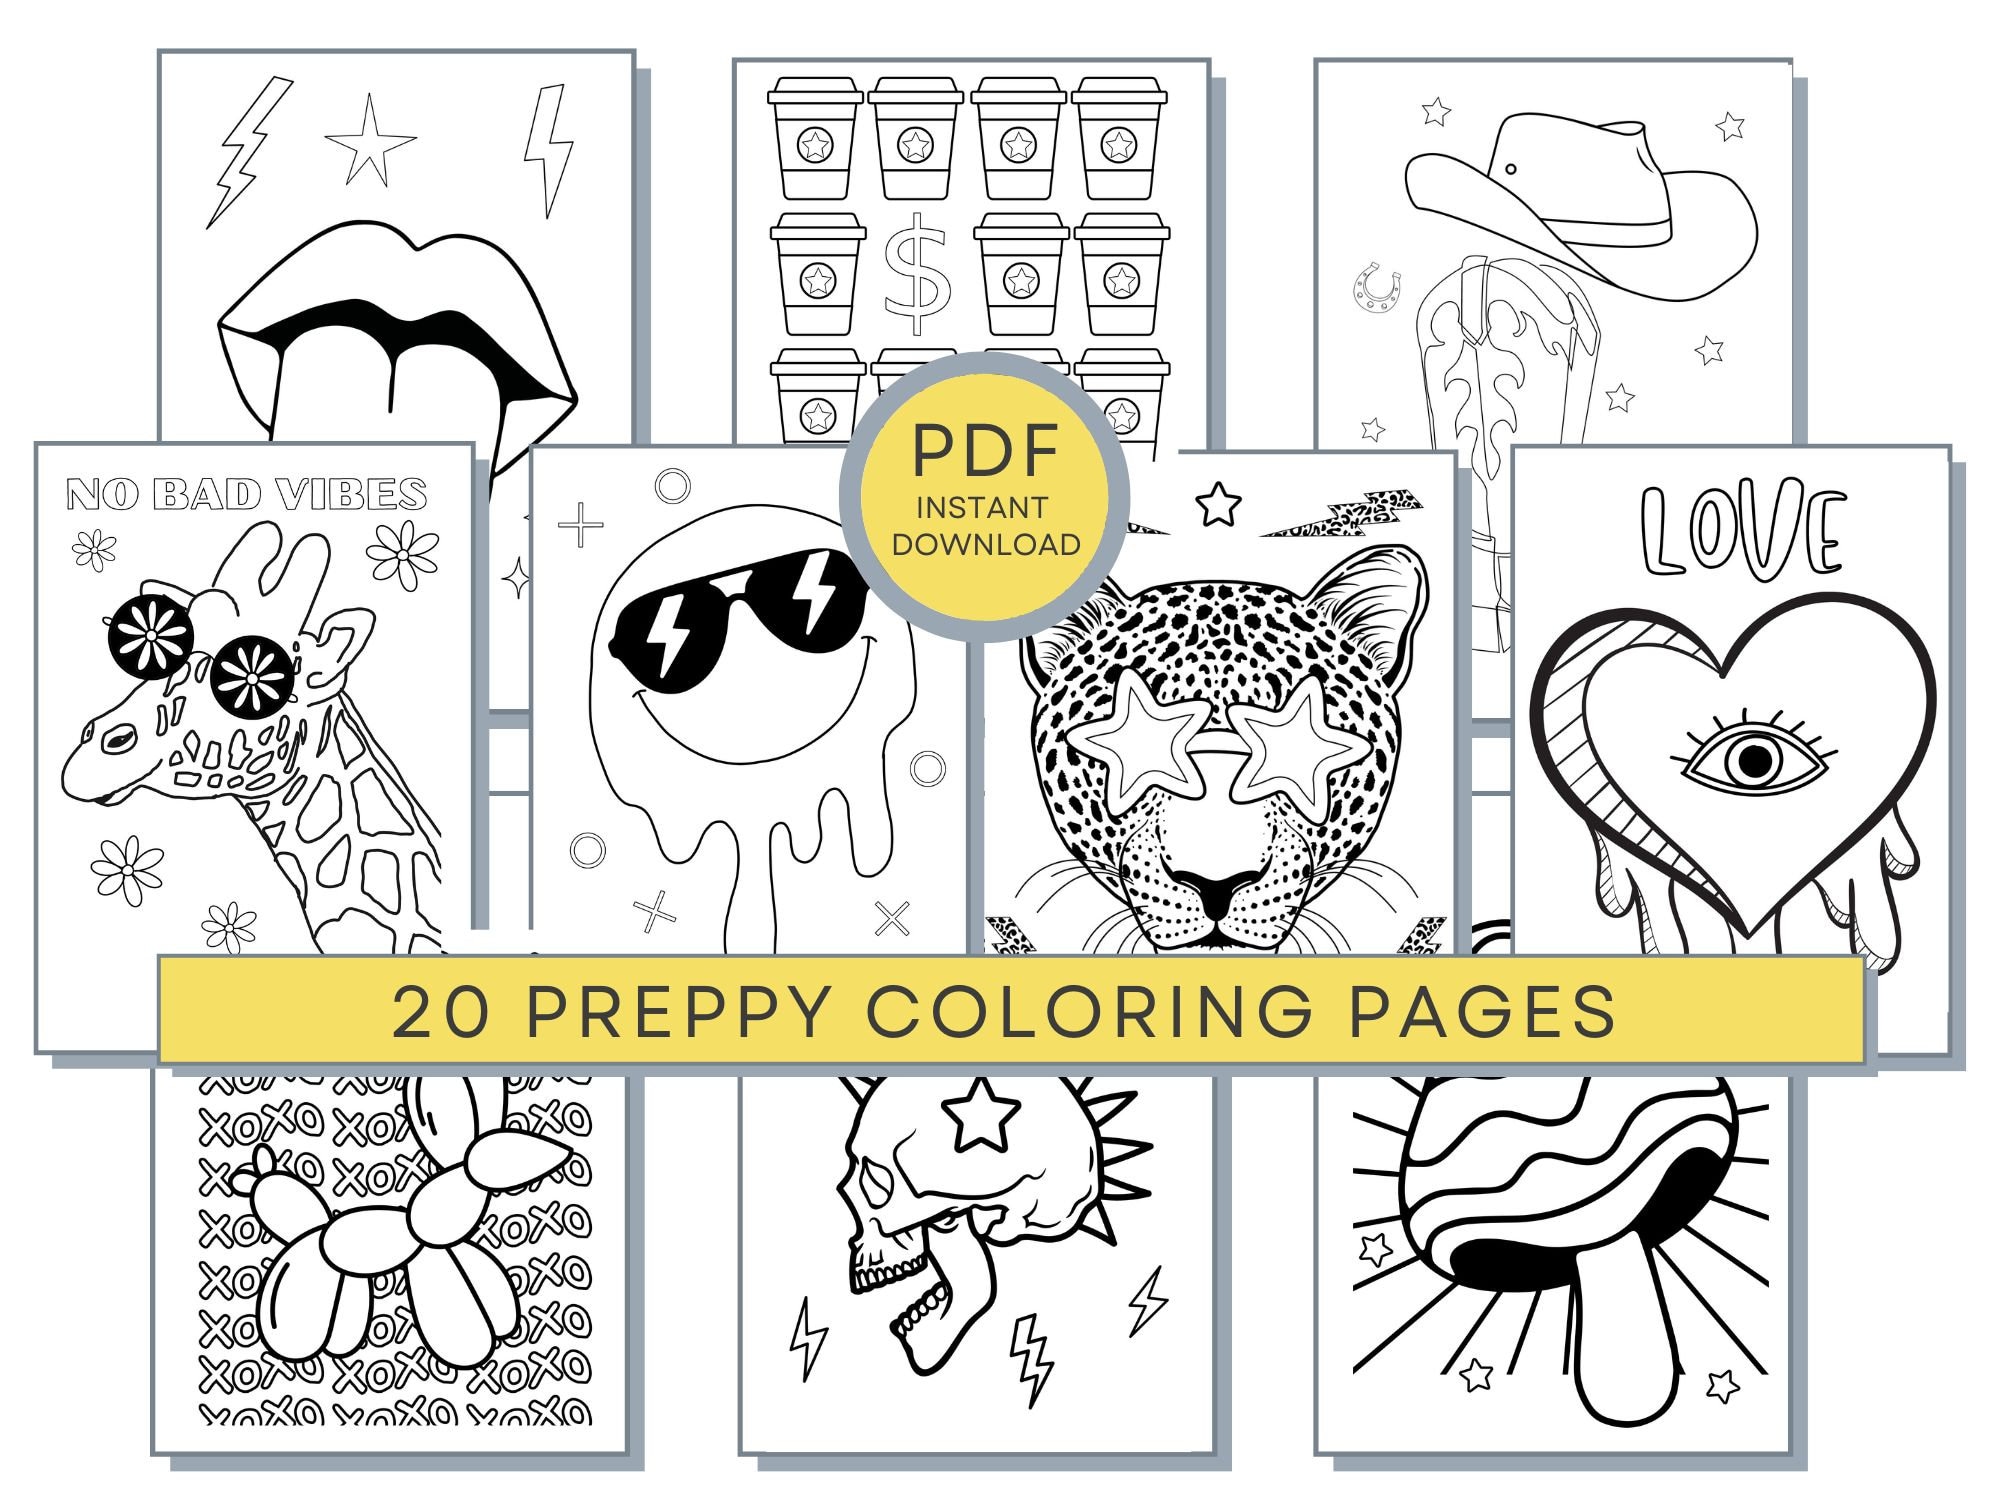 Preppy coloring pages teens coloring pages preppy aesthetic coloring teen printables teen pdf coloring teen girl coloring